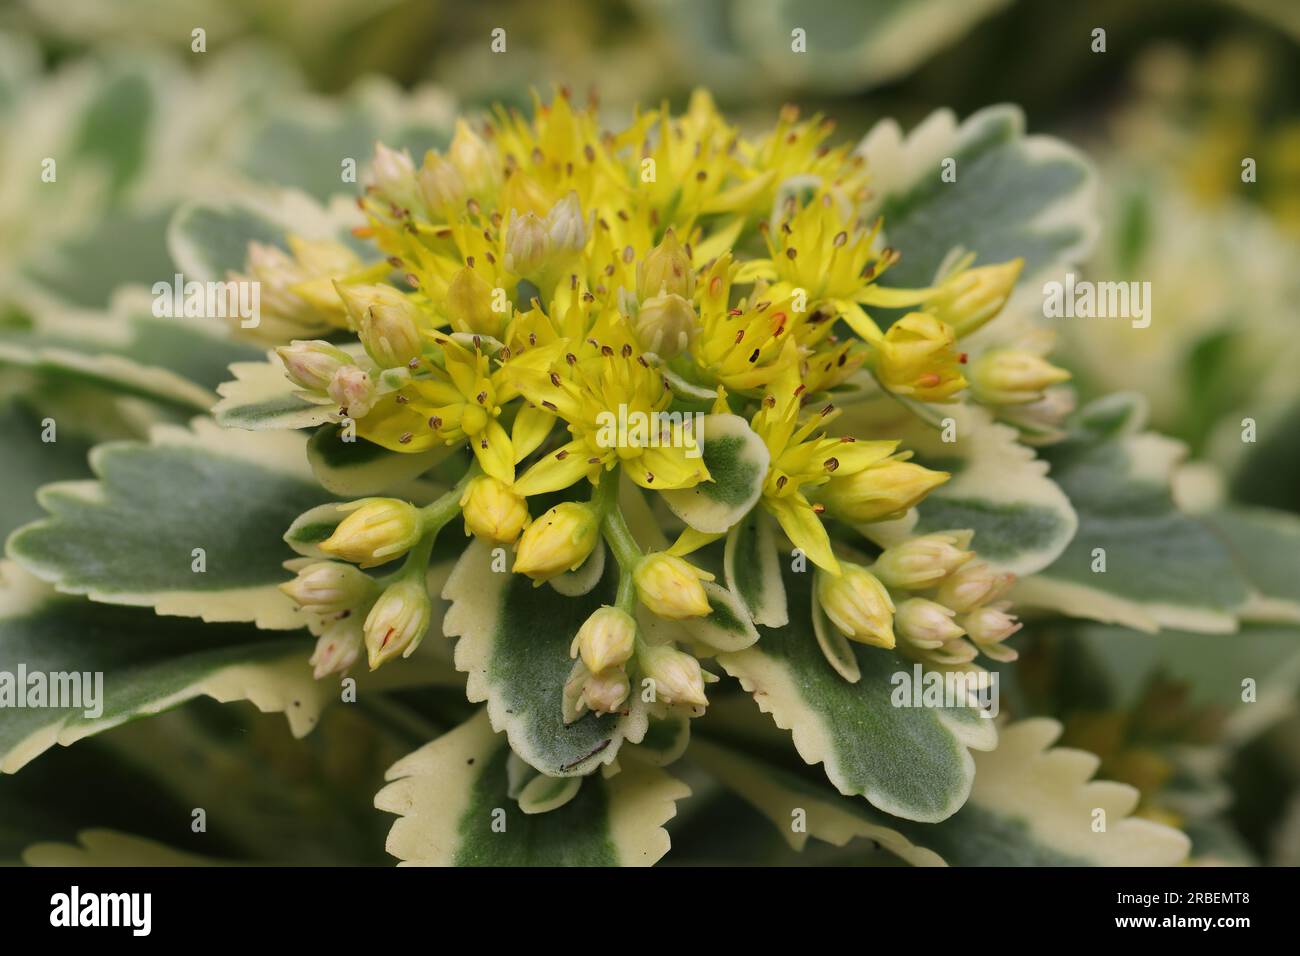 Close-up of a beautiful Phedimus aizoon plant with a dense yellow inflorescence in side view Stock Photo